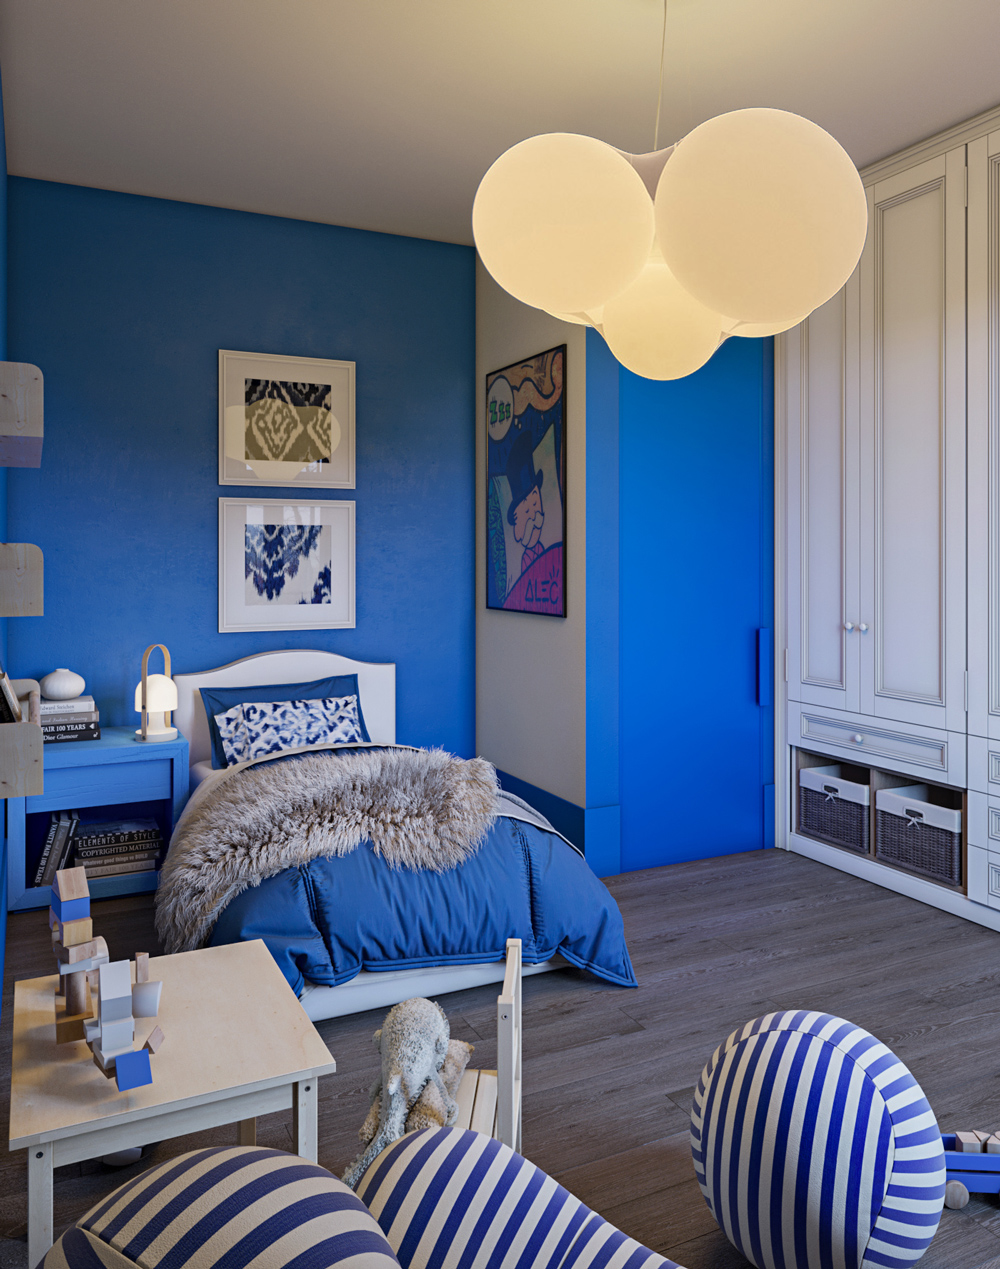 How to Choose the Perfect Light for Your Kids Room